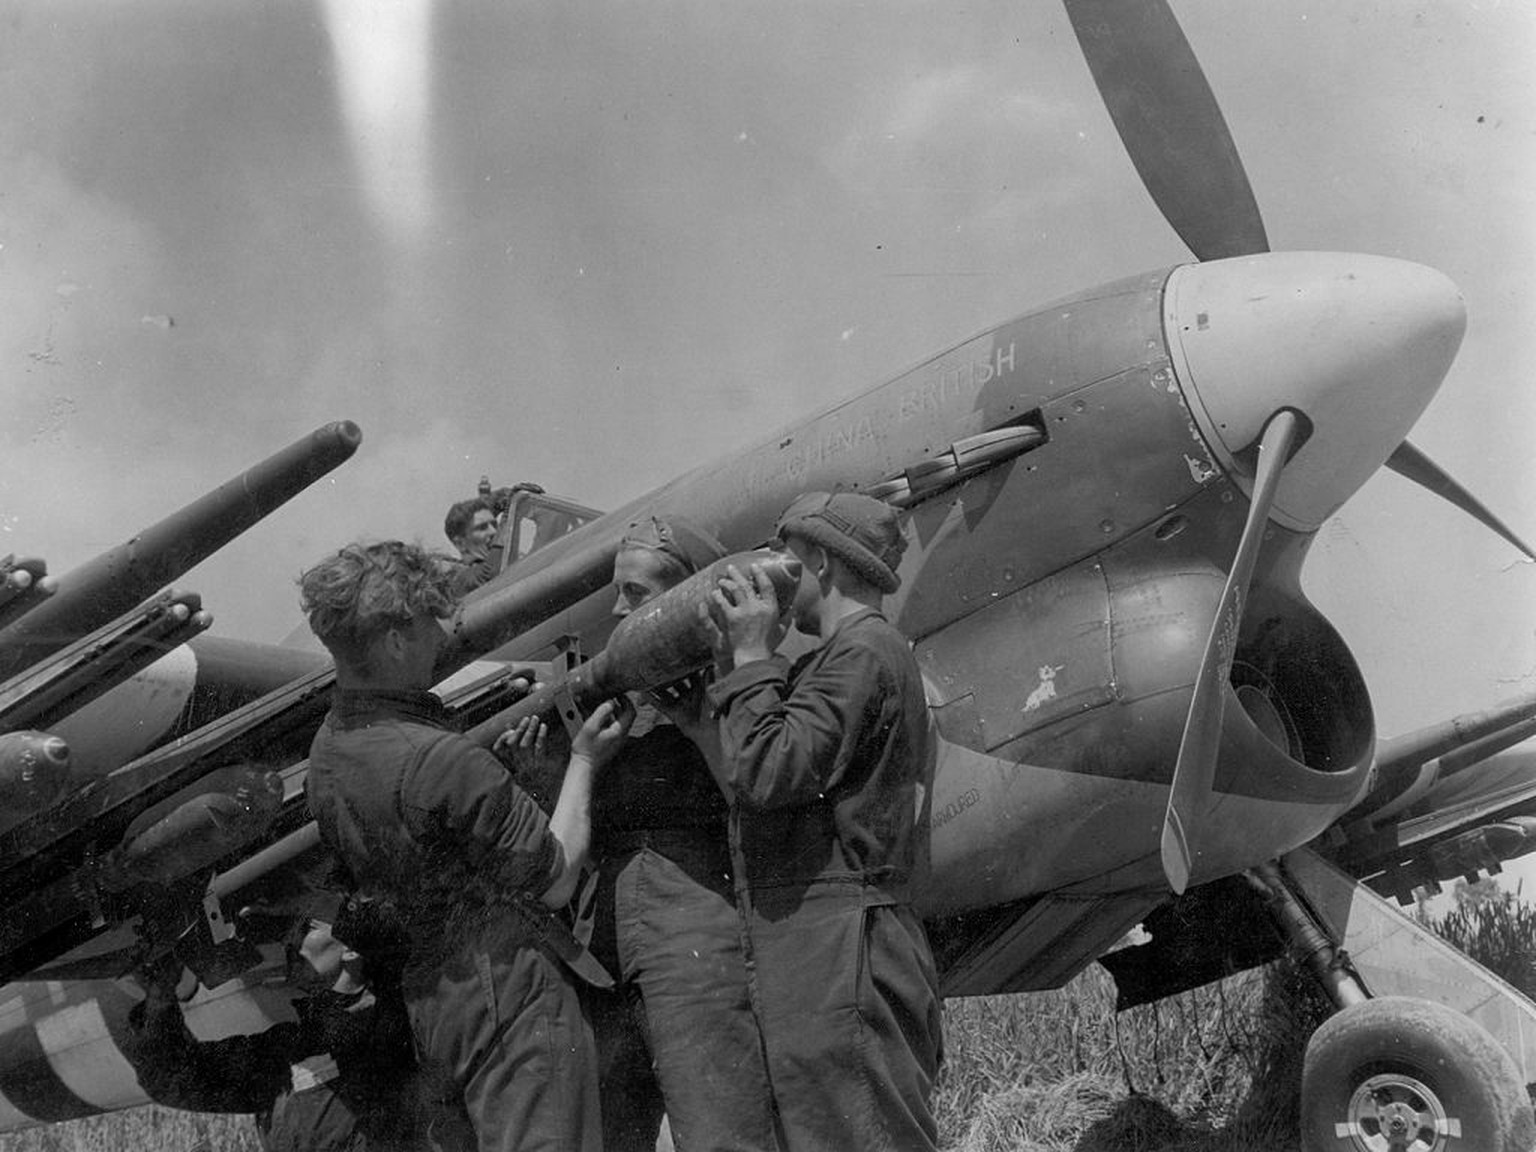 Hawker Typhoon being rearmed in July 1944 on a forward airfield in France during Operation Overlord, source: http://www.raf.mod.uk/dday/timeline_may.html